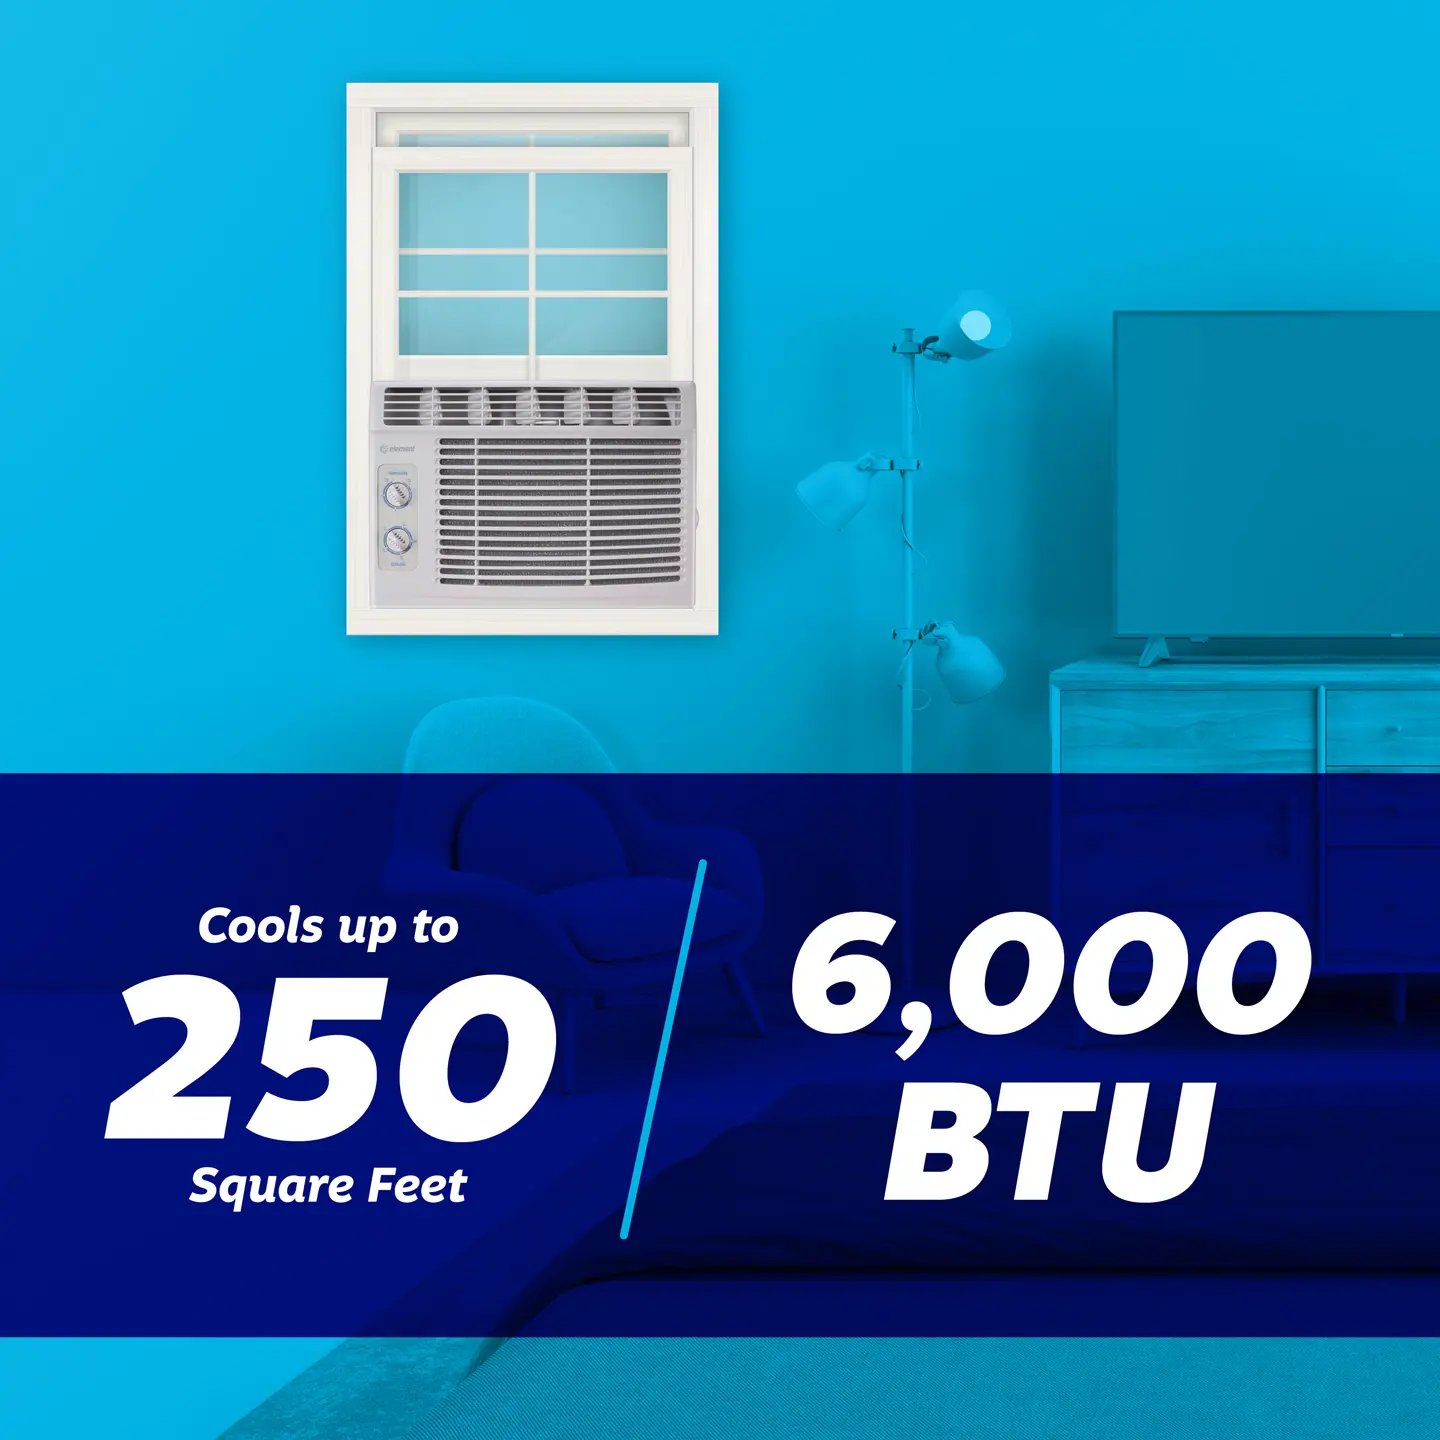 6,000 BTU - cools up to 250 square feet